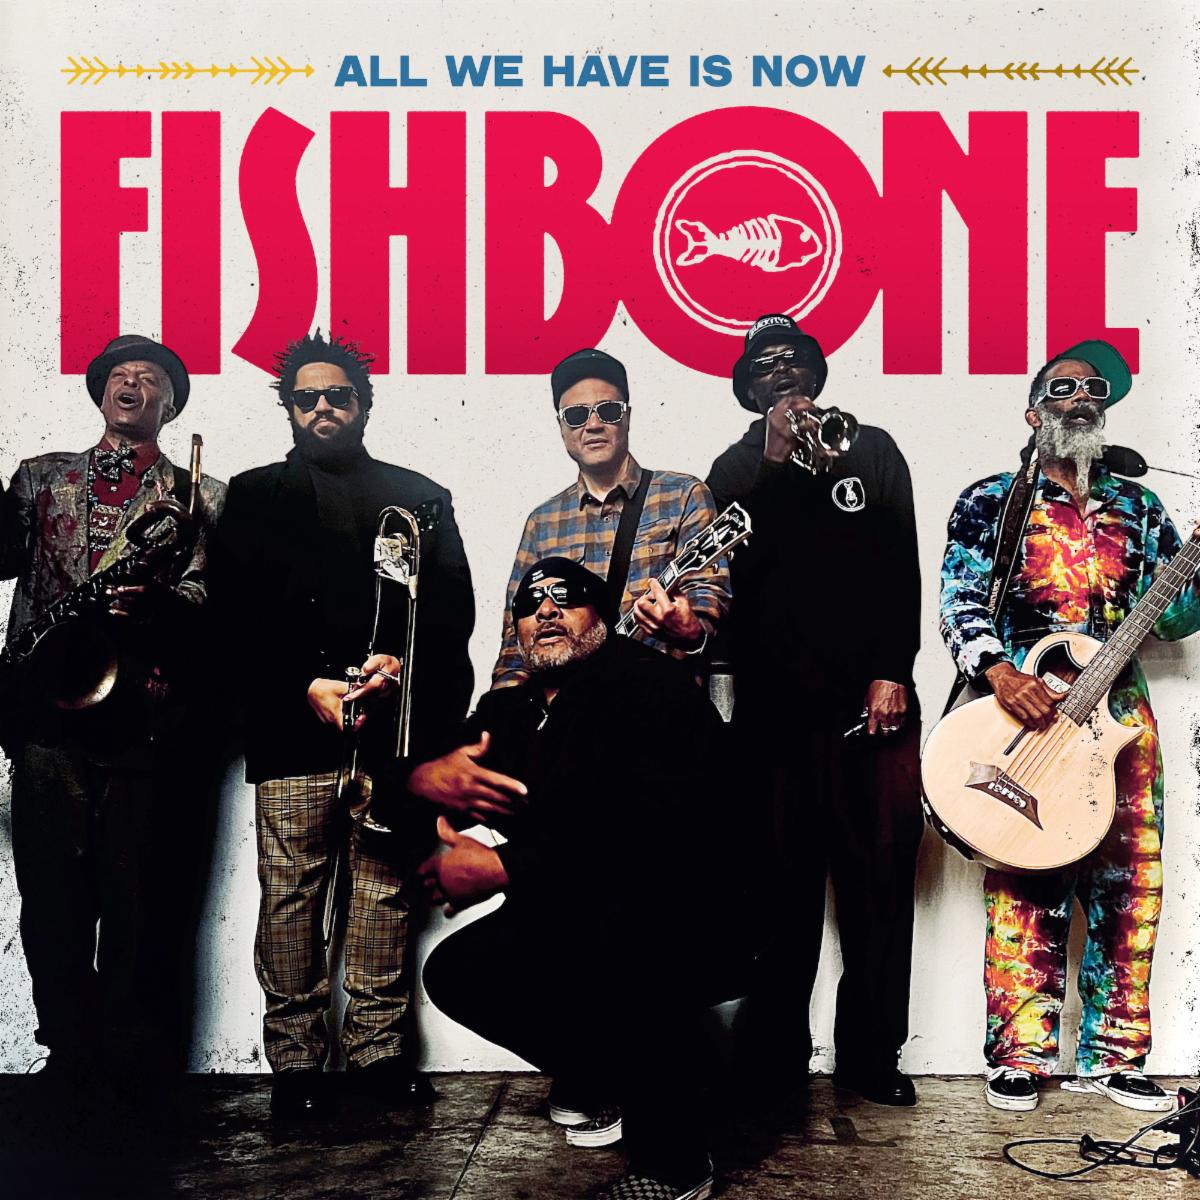 Fishbone | All We Have Is Now | 3hive.com